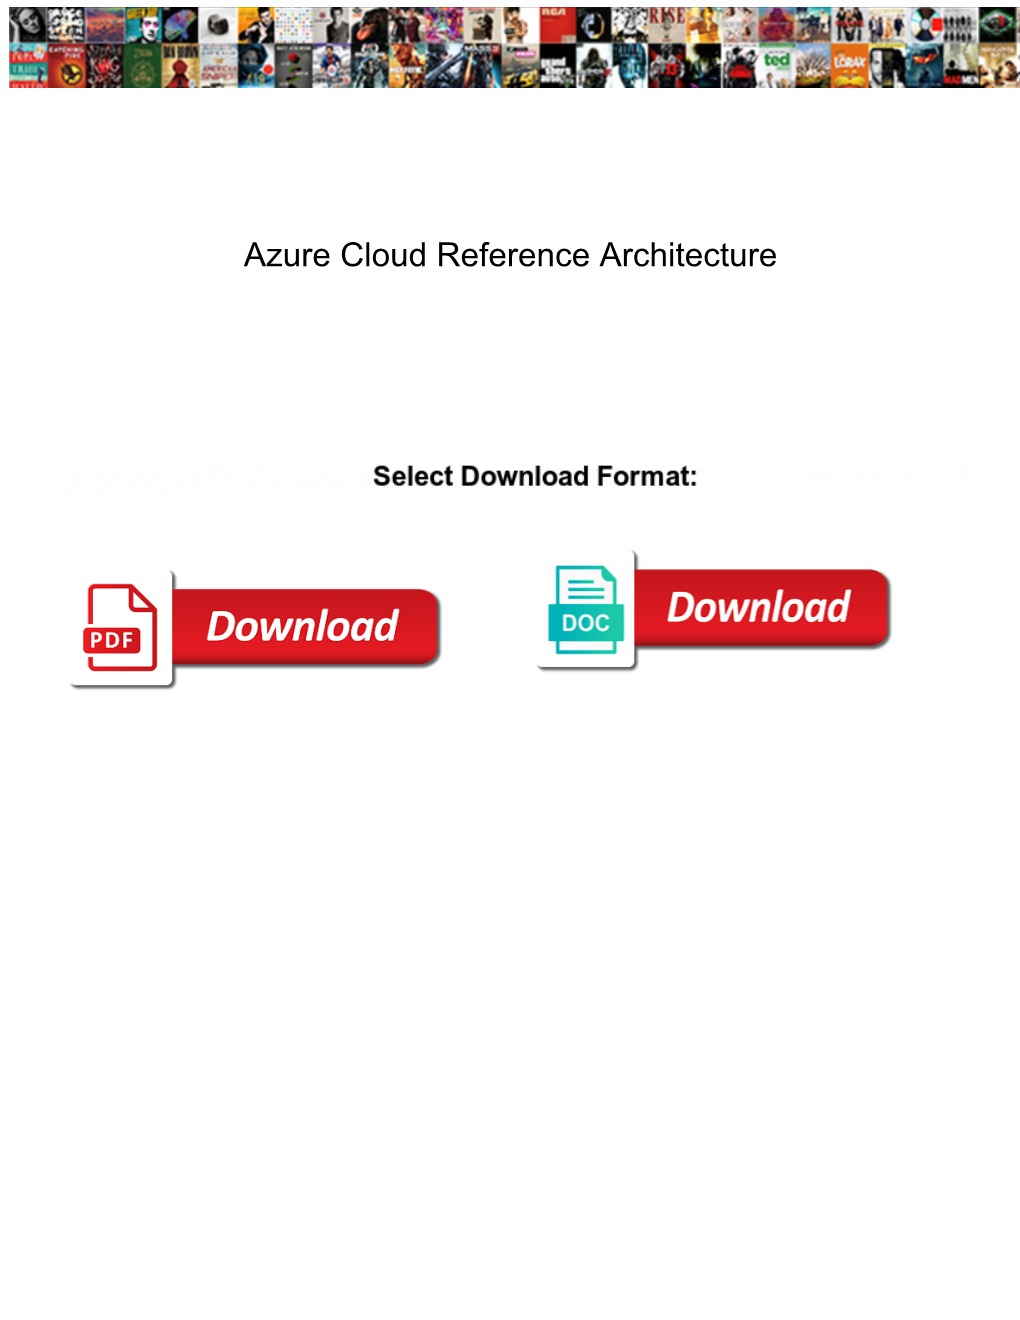 Azure Cloud Reference Architecture